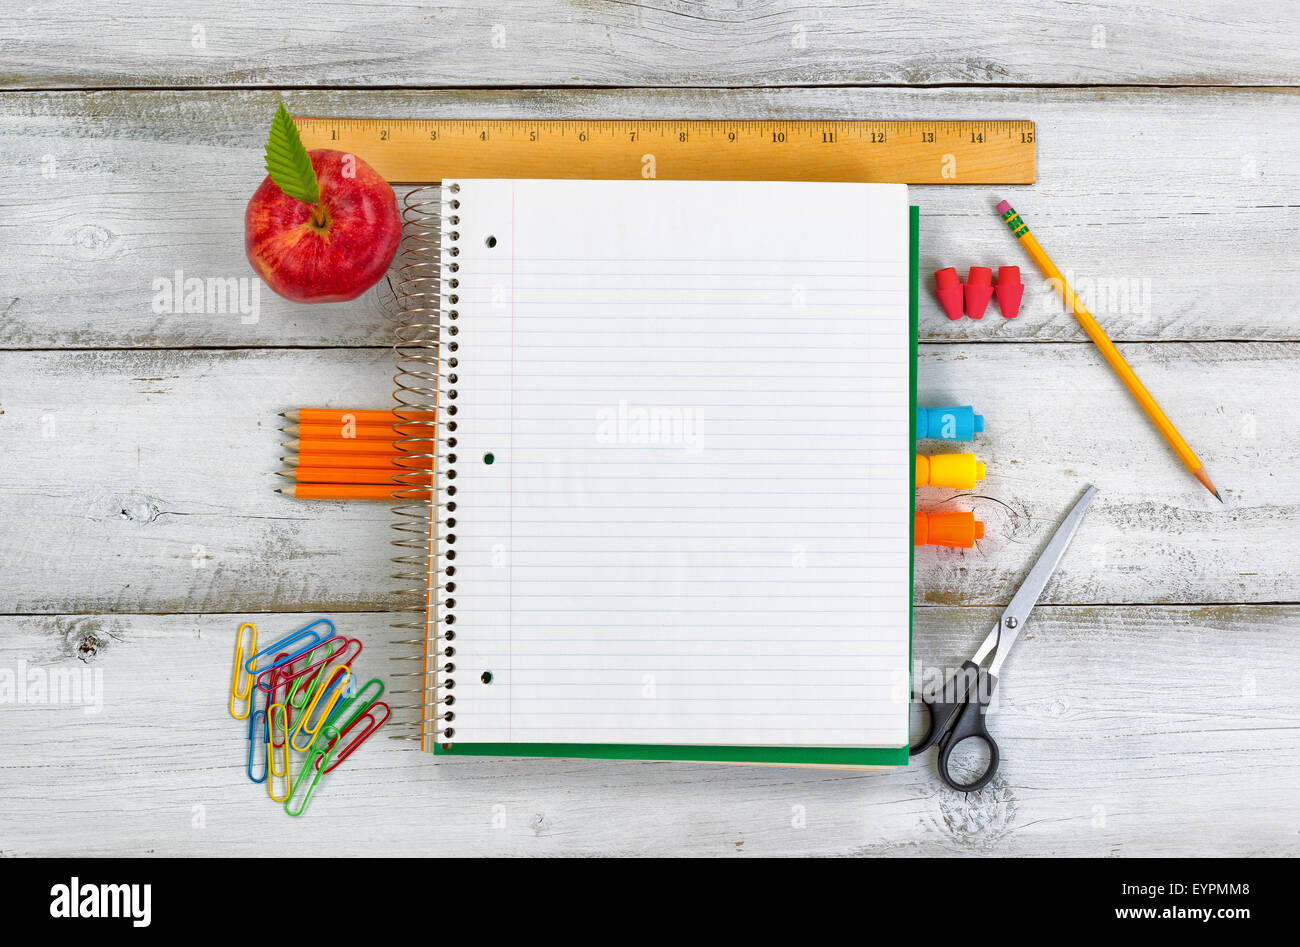 School supplies forming border on notepad with rustic white wood as background. Stock Photo